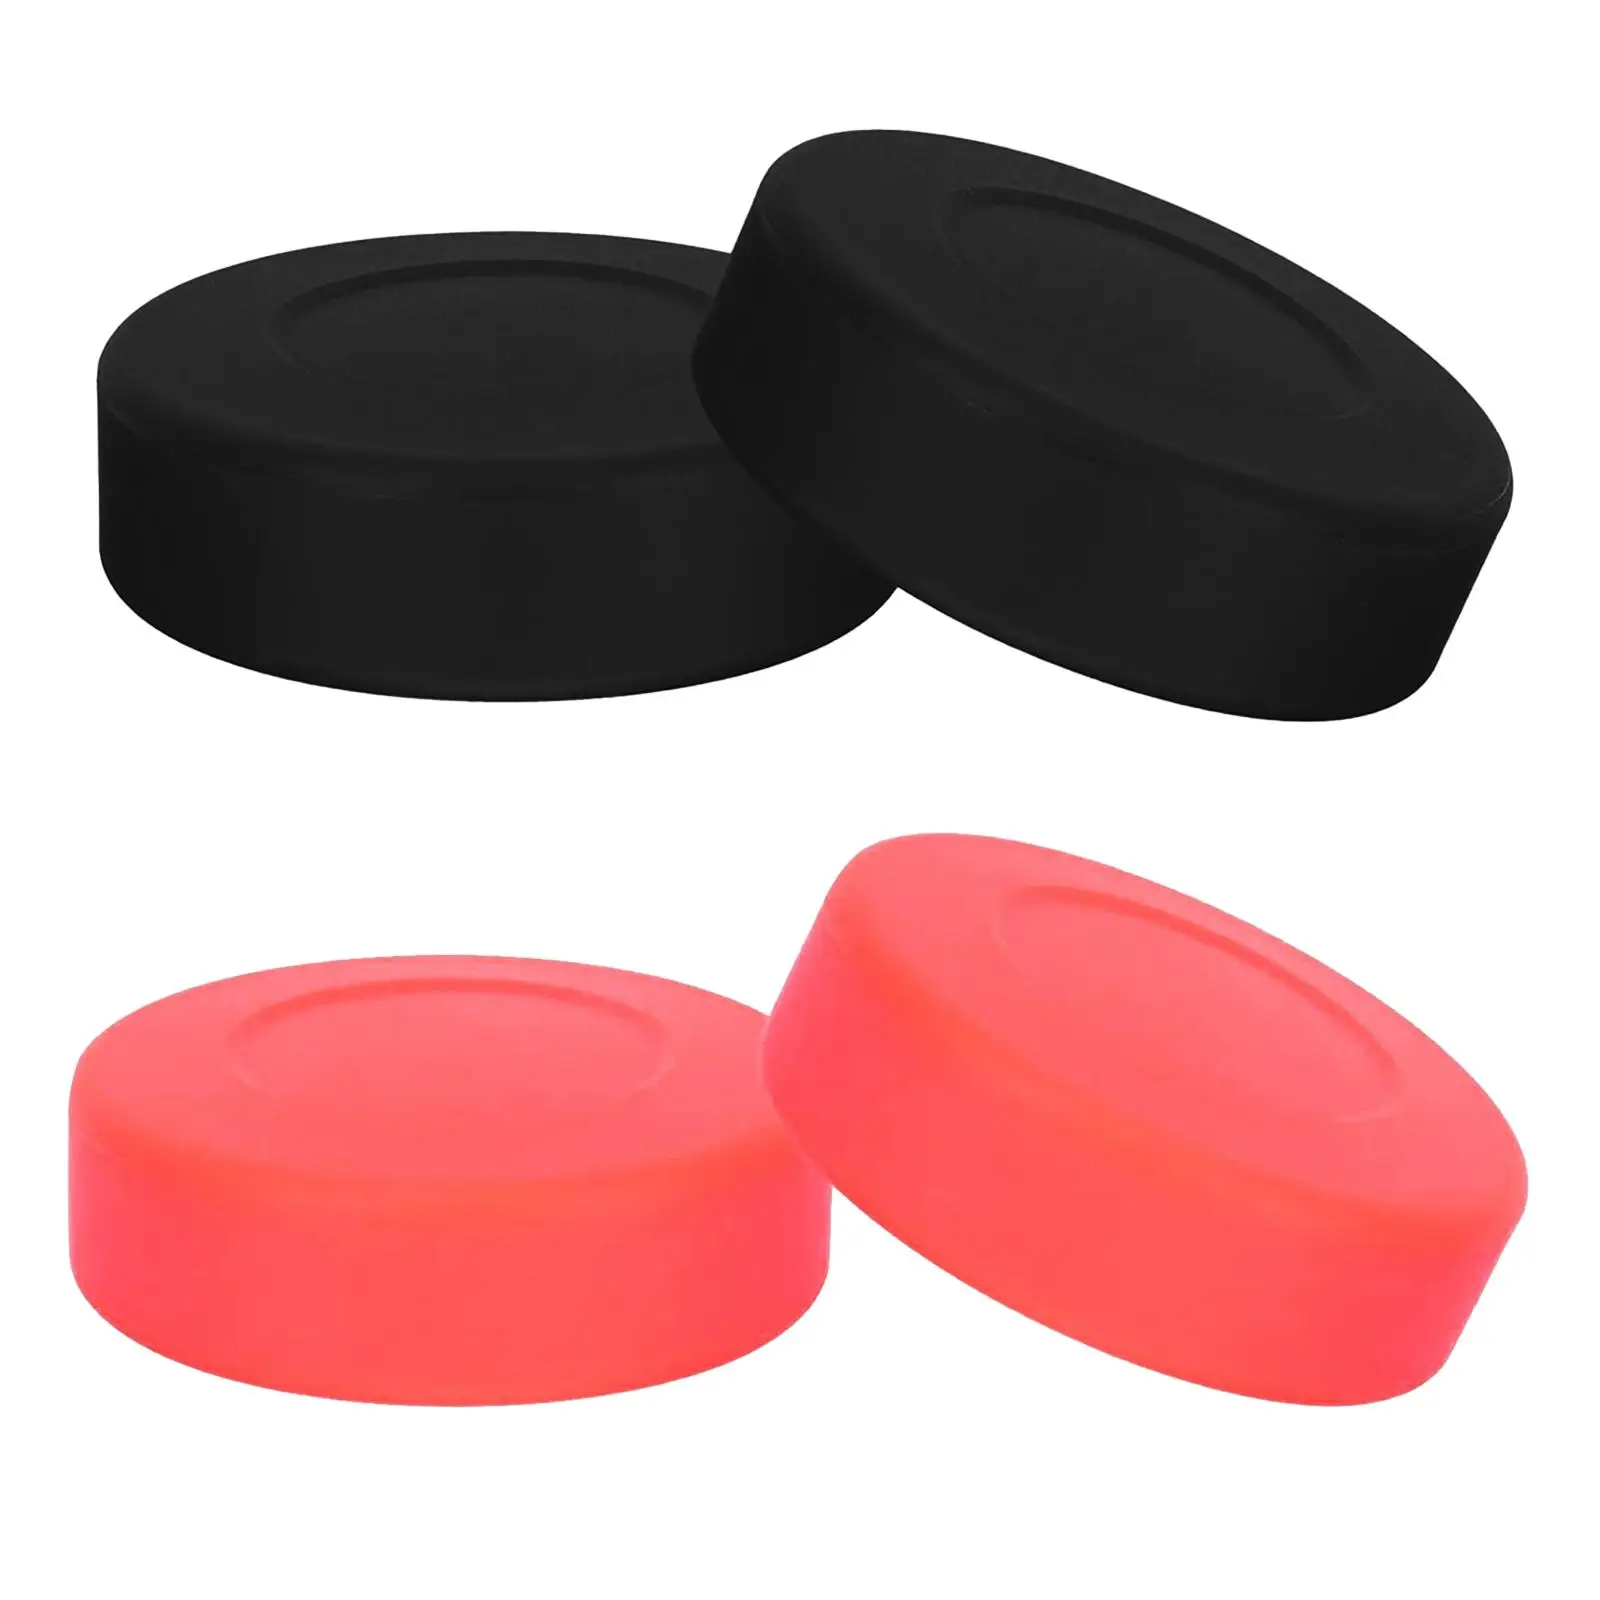 2Pcs Ice Hockey Puck Simple to Use Durable Portable Smooth Hockey Ball for Children Professionals Beginners Competition Exercise